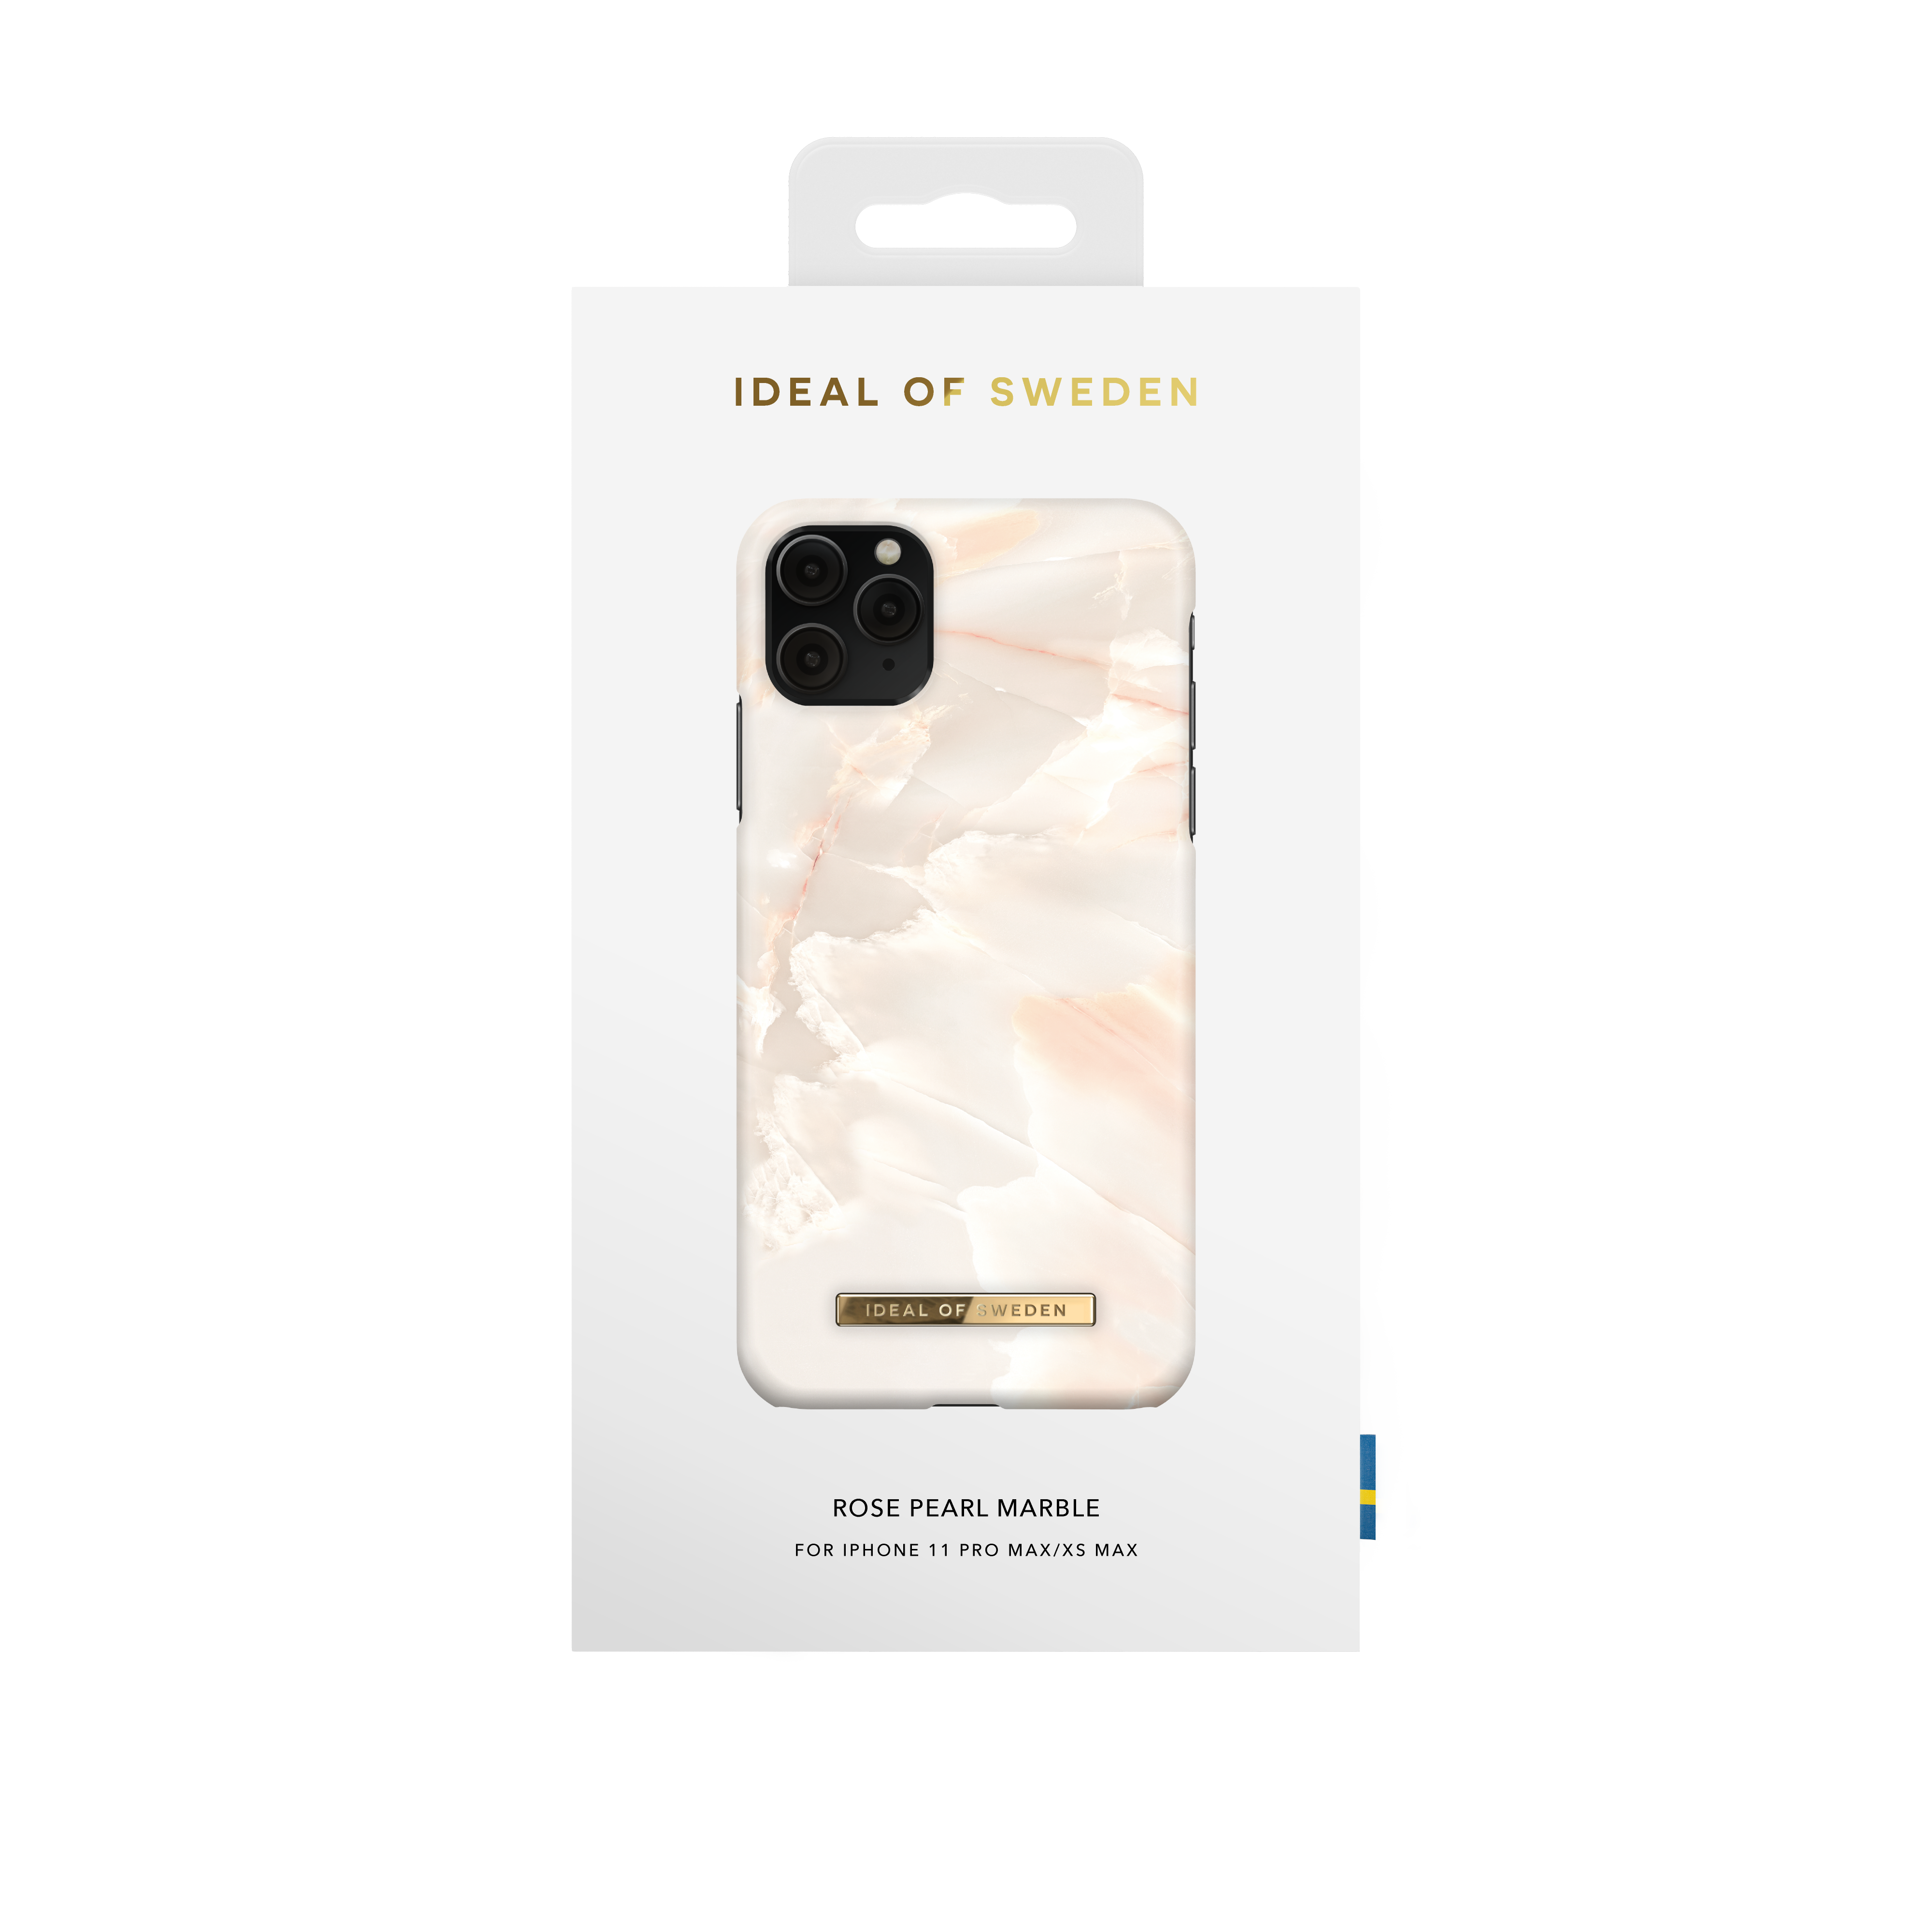 IDEAL OF SWEDEN XS Rose Backcover, Marble Apple, Max, Pro iPhone Pearl iPhone 11 IDFCSS21-I1965-257, Max